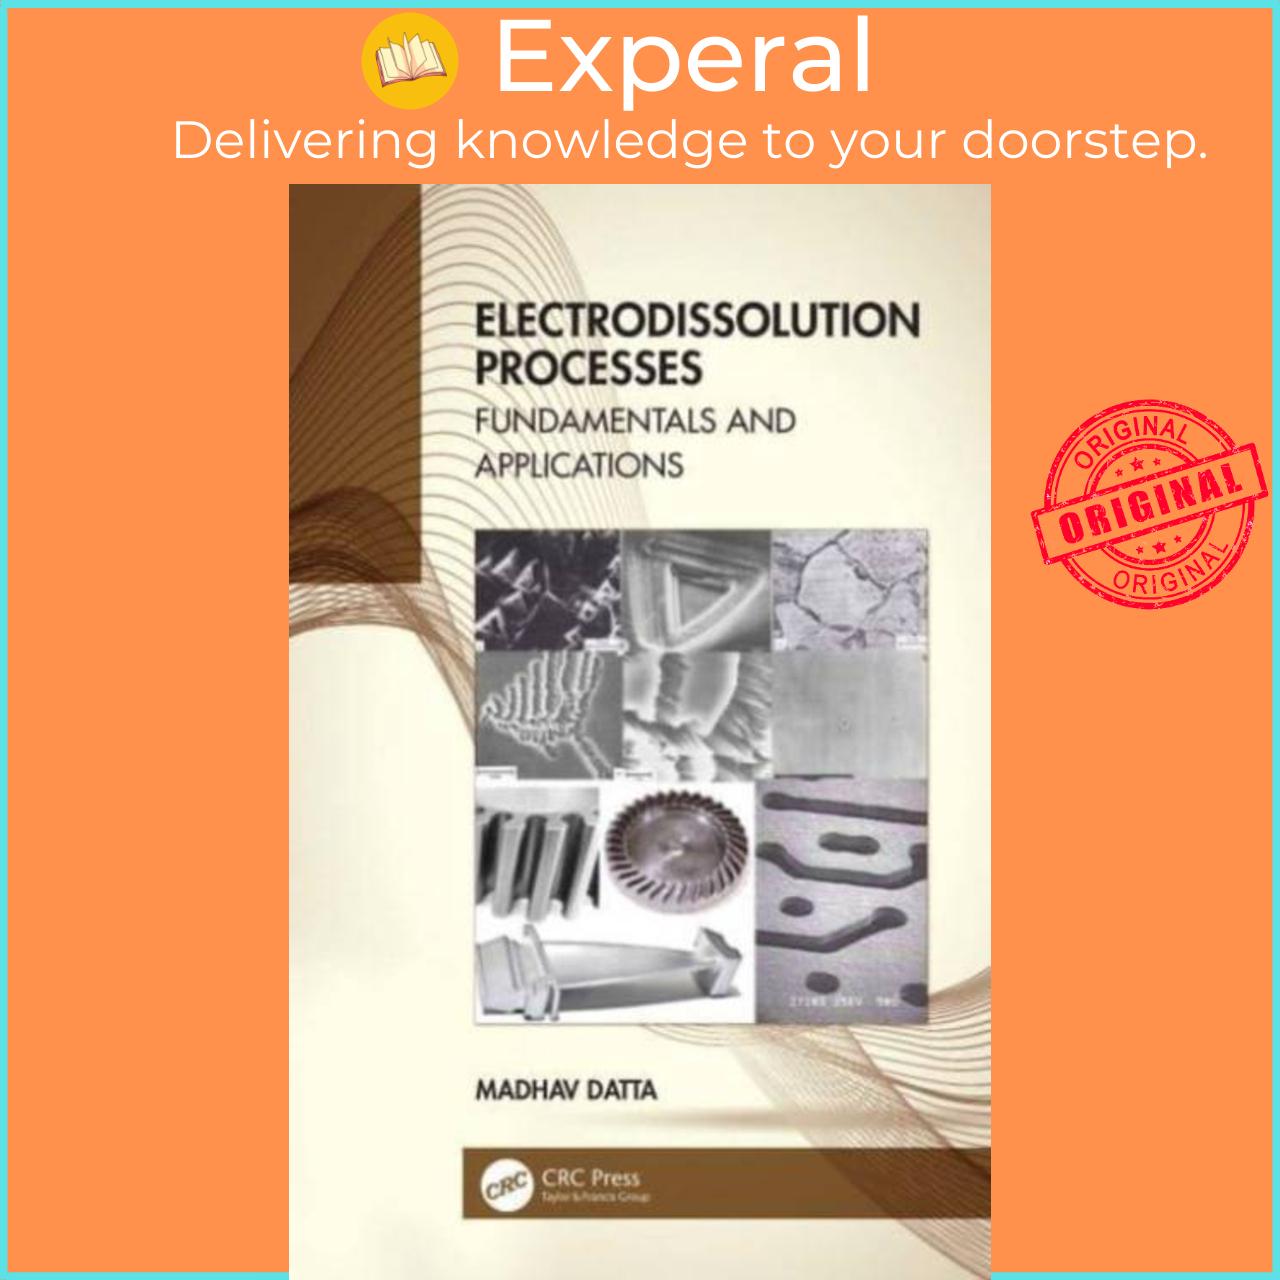 Sách - Electrodissolution Processes - Fundamentals and Applications by Madhav Datta (UK edition, paperback)